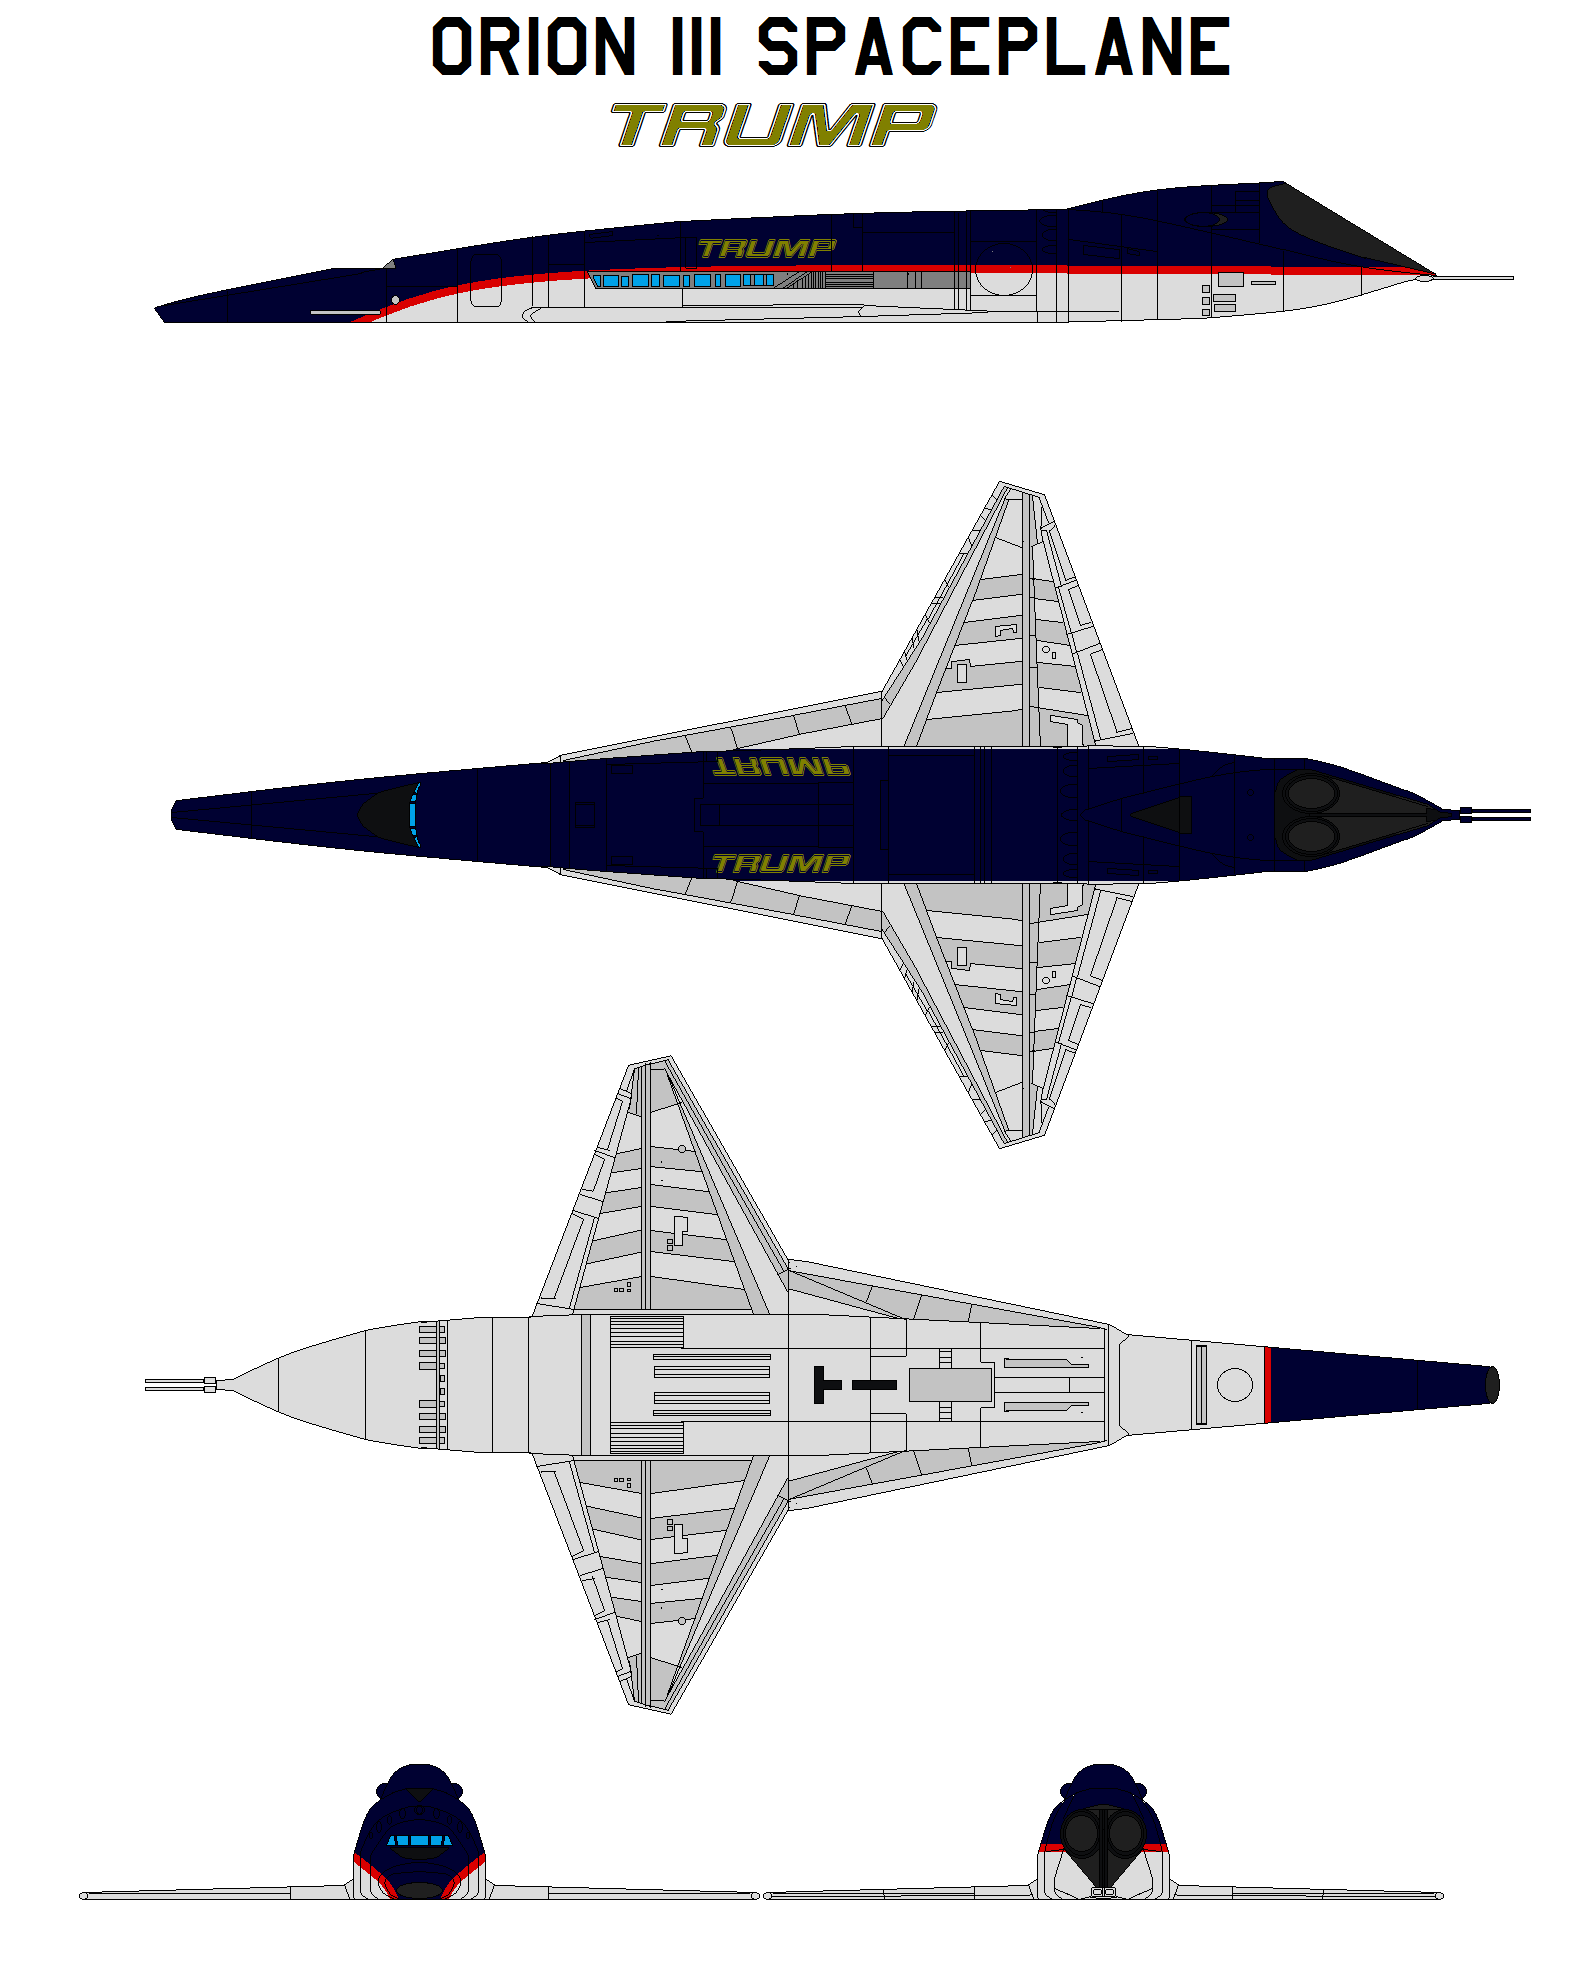 dorp grond Actief Orion III Spaceplane 2001 A Space Odyssey trump by bagera3005 on DeviantArt